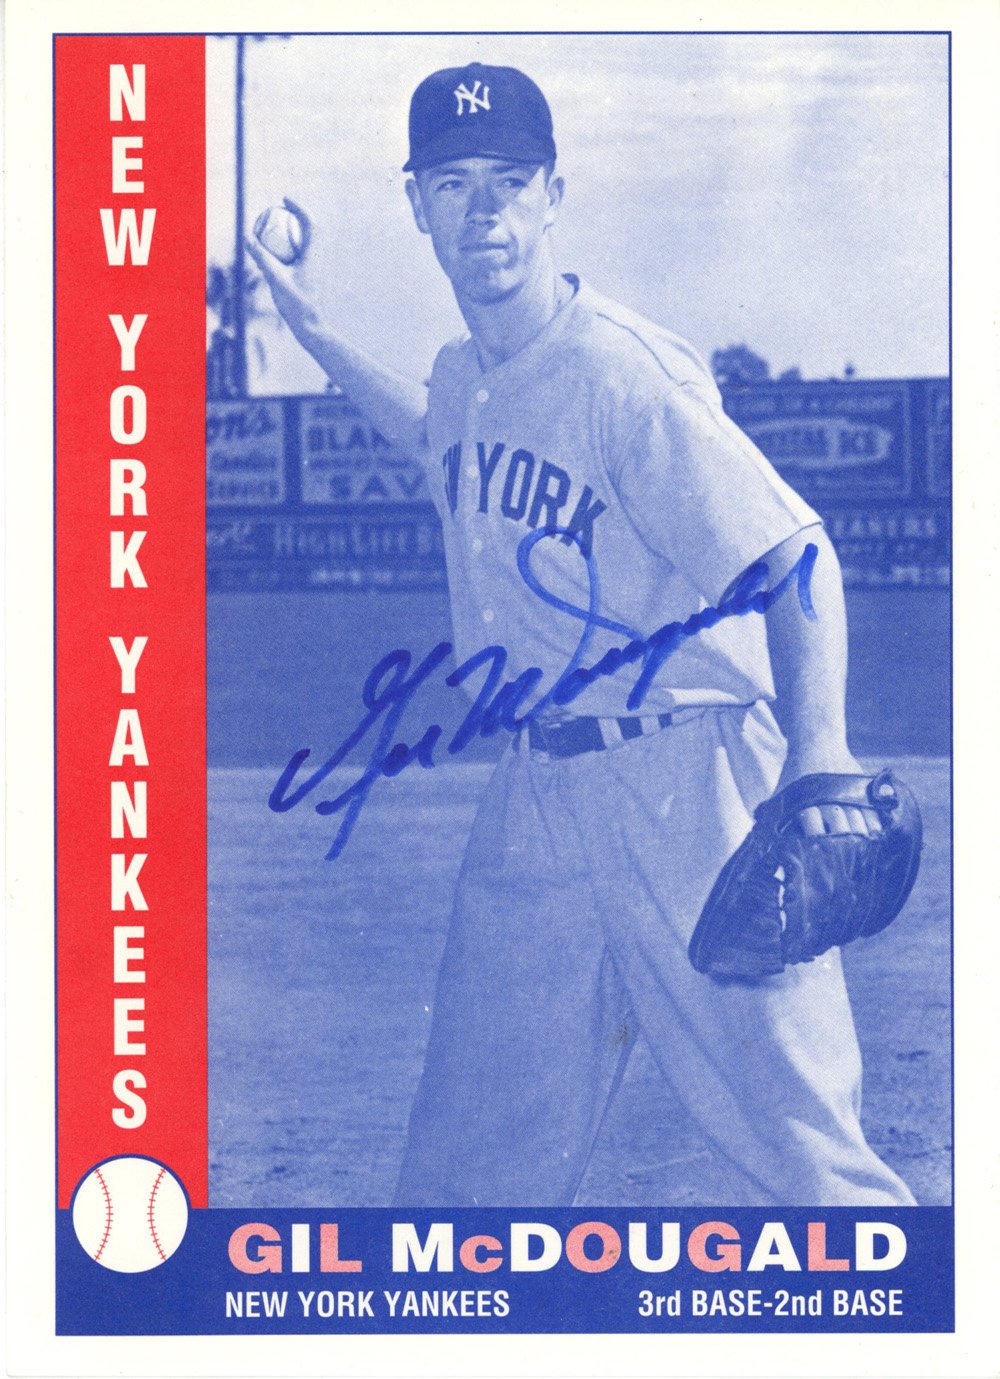 Gil McDougald Signed New York Yankees 4.5" x 5.5" Stat Advertisement Card